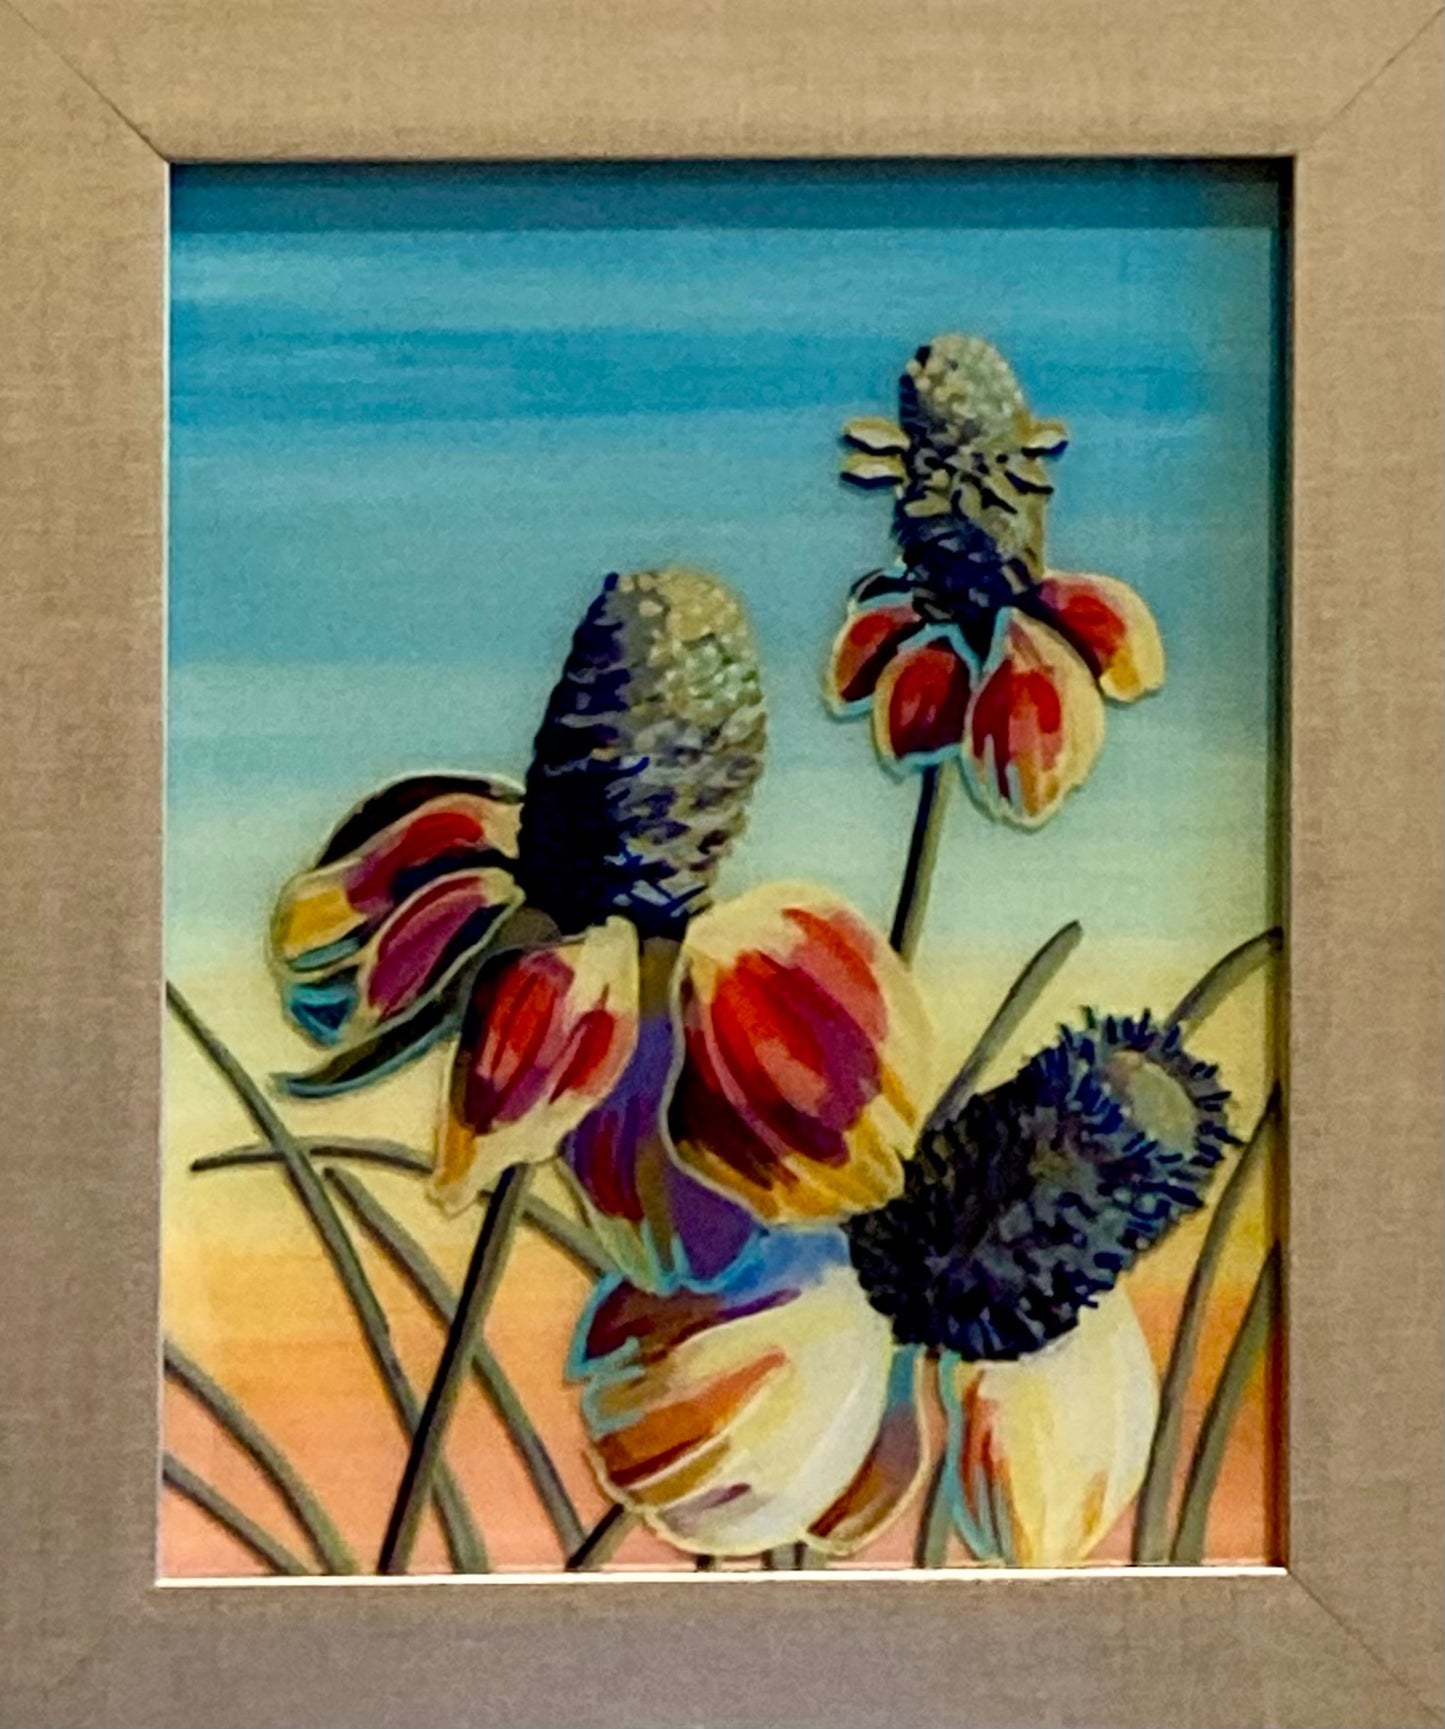 "Coneflower Sunset" by Bethany Richards. Reverse glass painting, double paned. 10"x8".